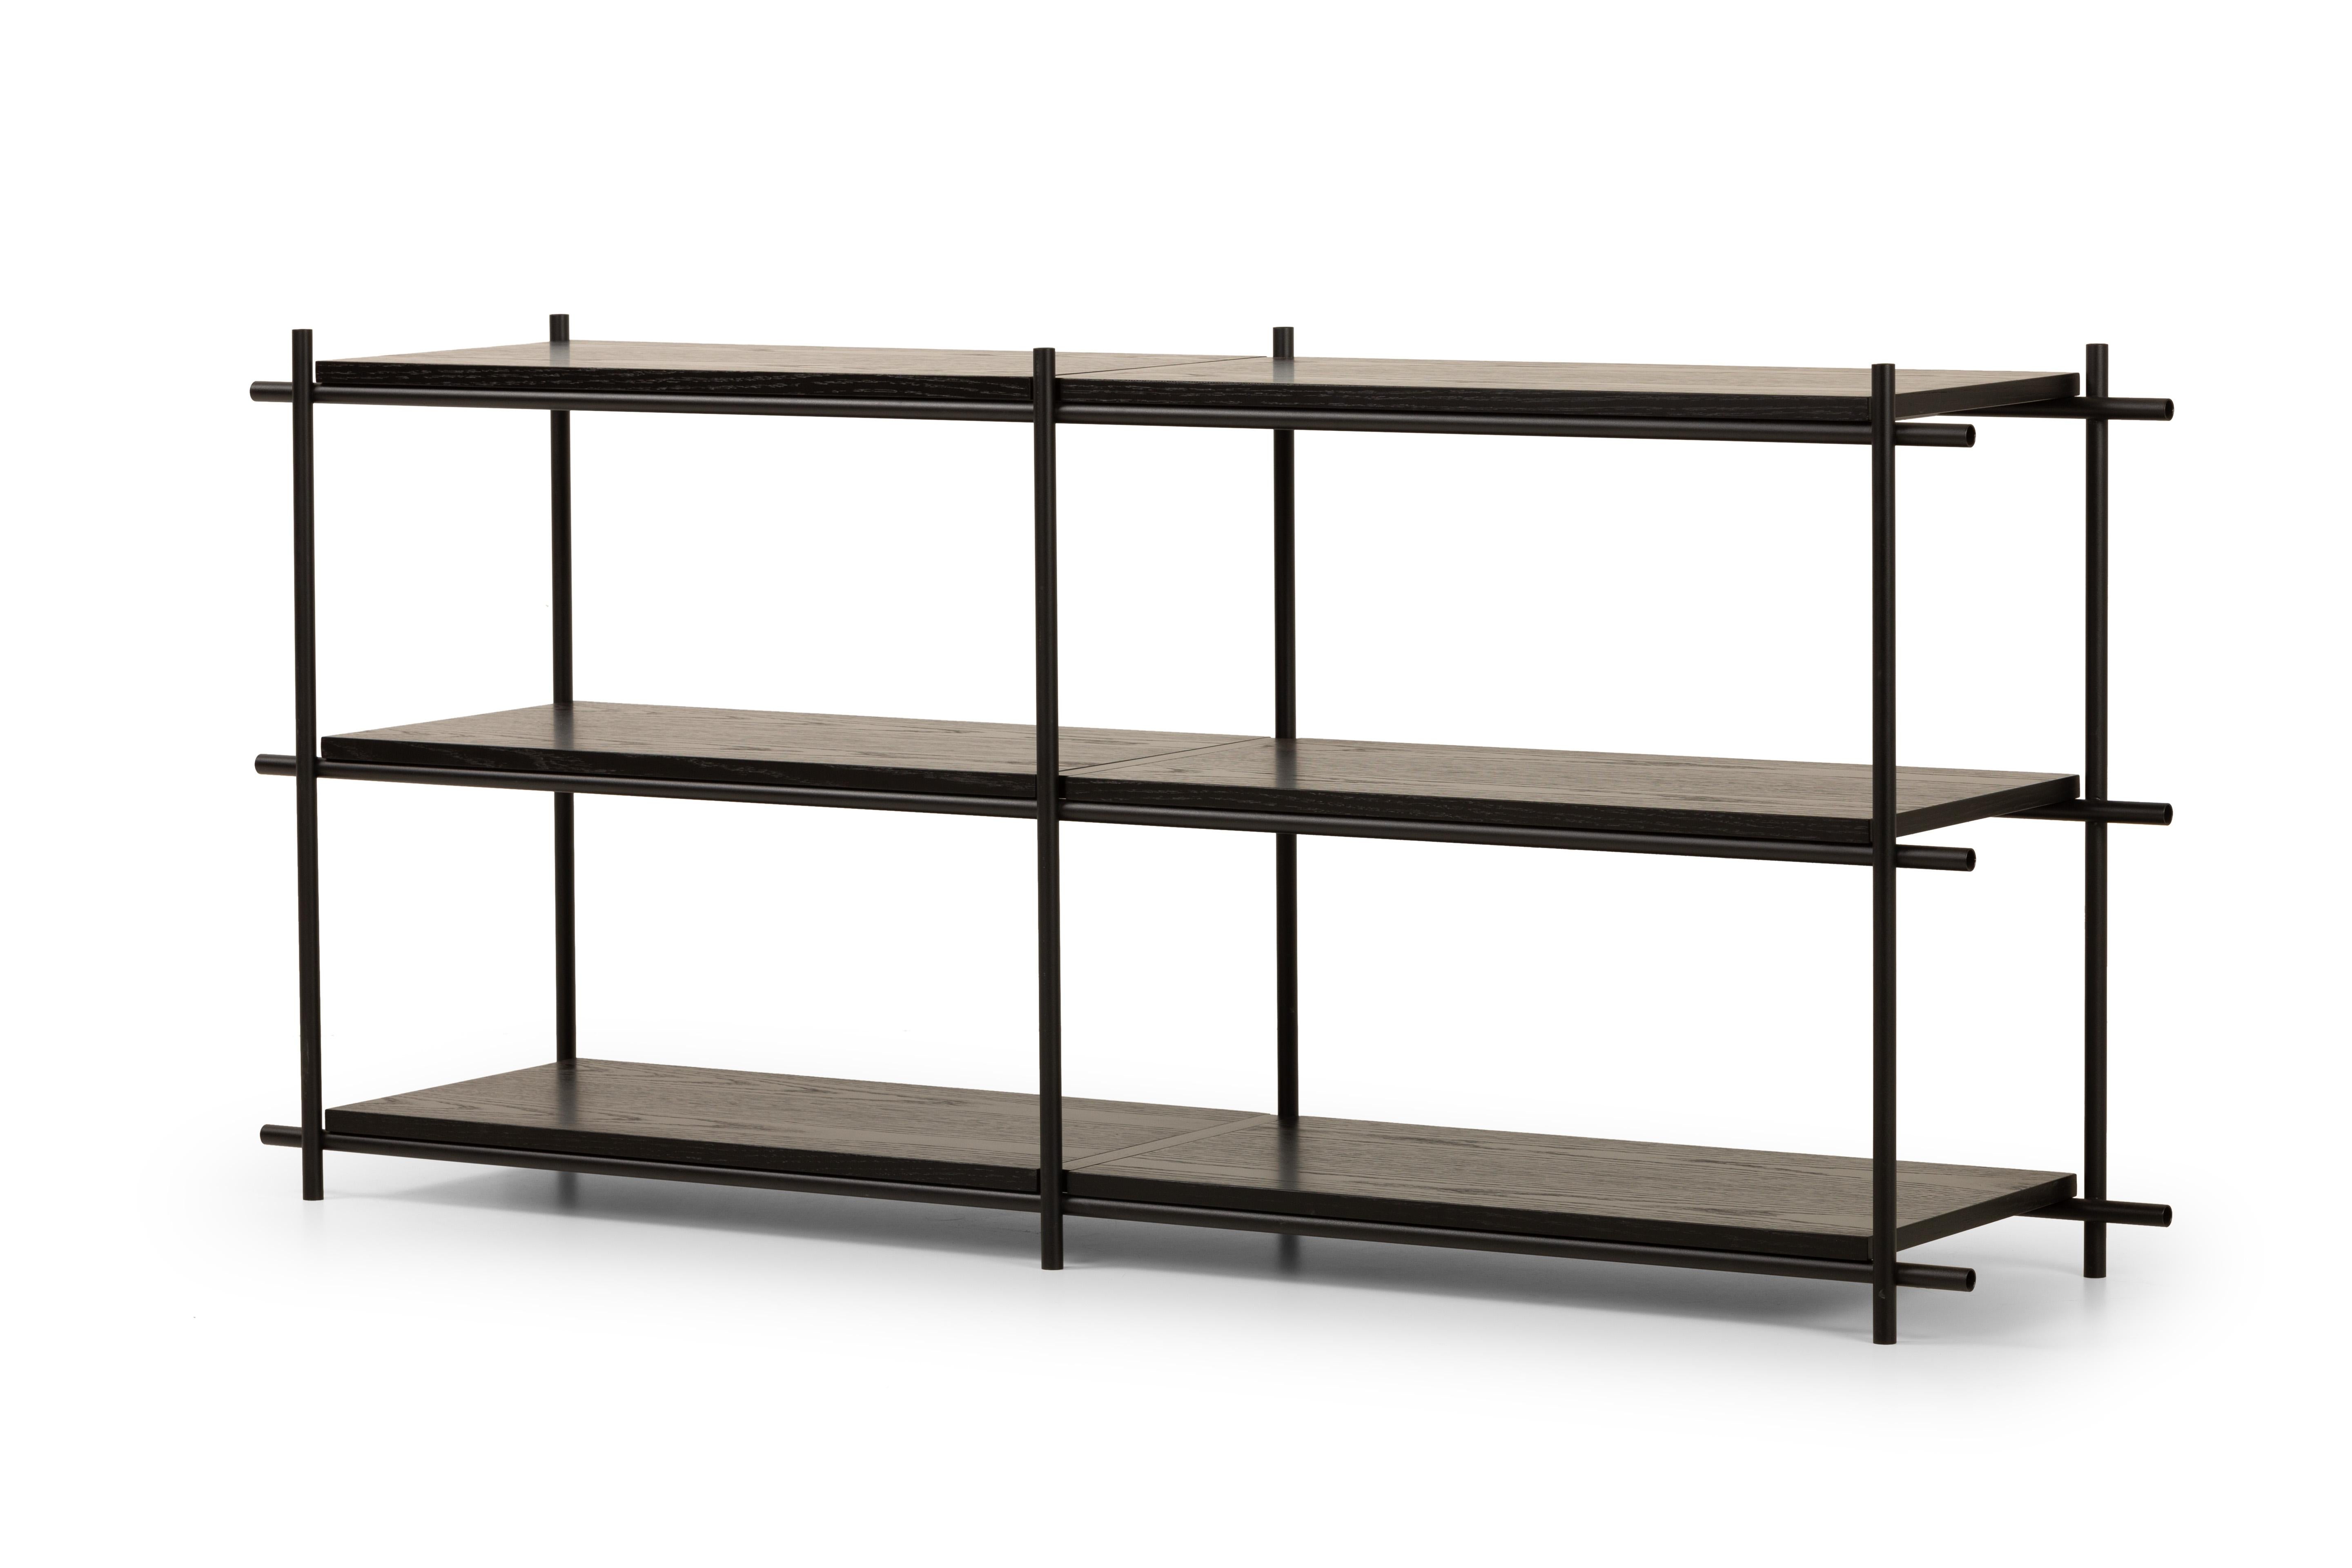 Innocent Bookshelf Four Modules by Mingardo
Dimensions: D166 x W39 x H76cm 
Materials: RAL 9005 black varnished iron structure, shelf in black stained oak
Weight: 85 kg

Also Available in different dimensions.

The Innocent project is inspired by